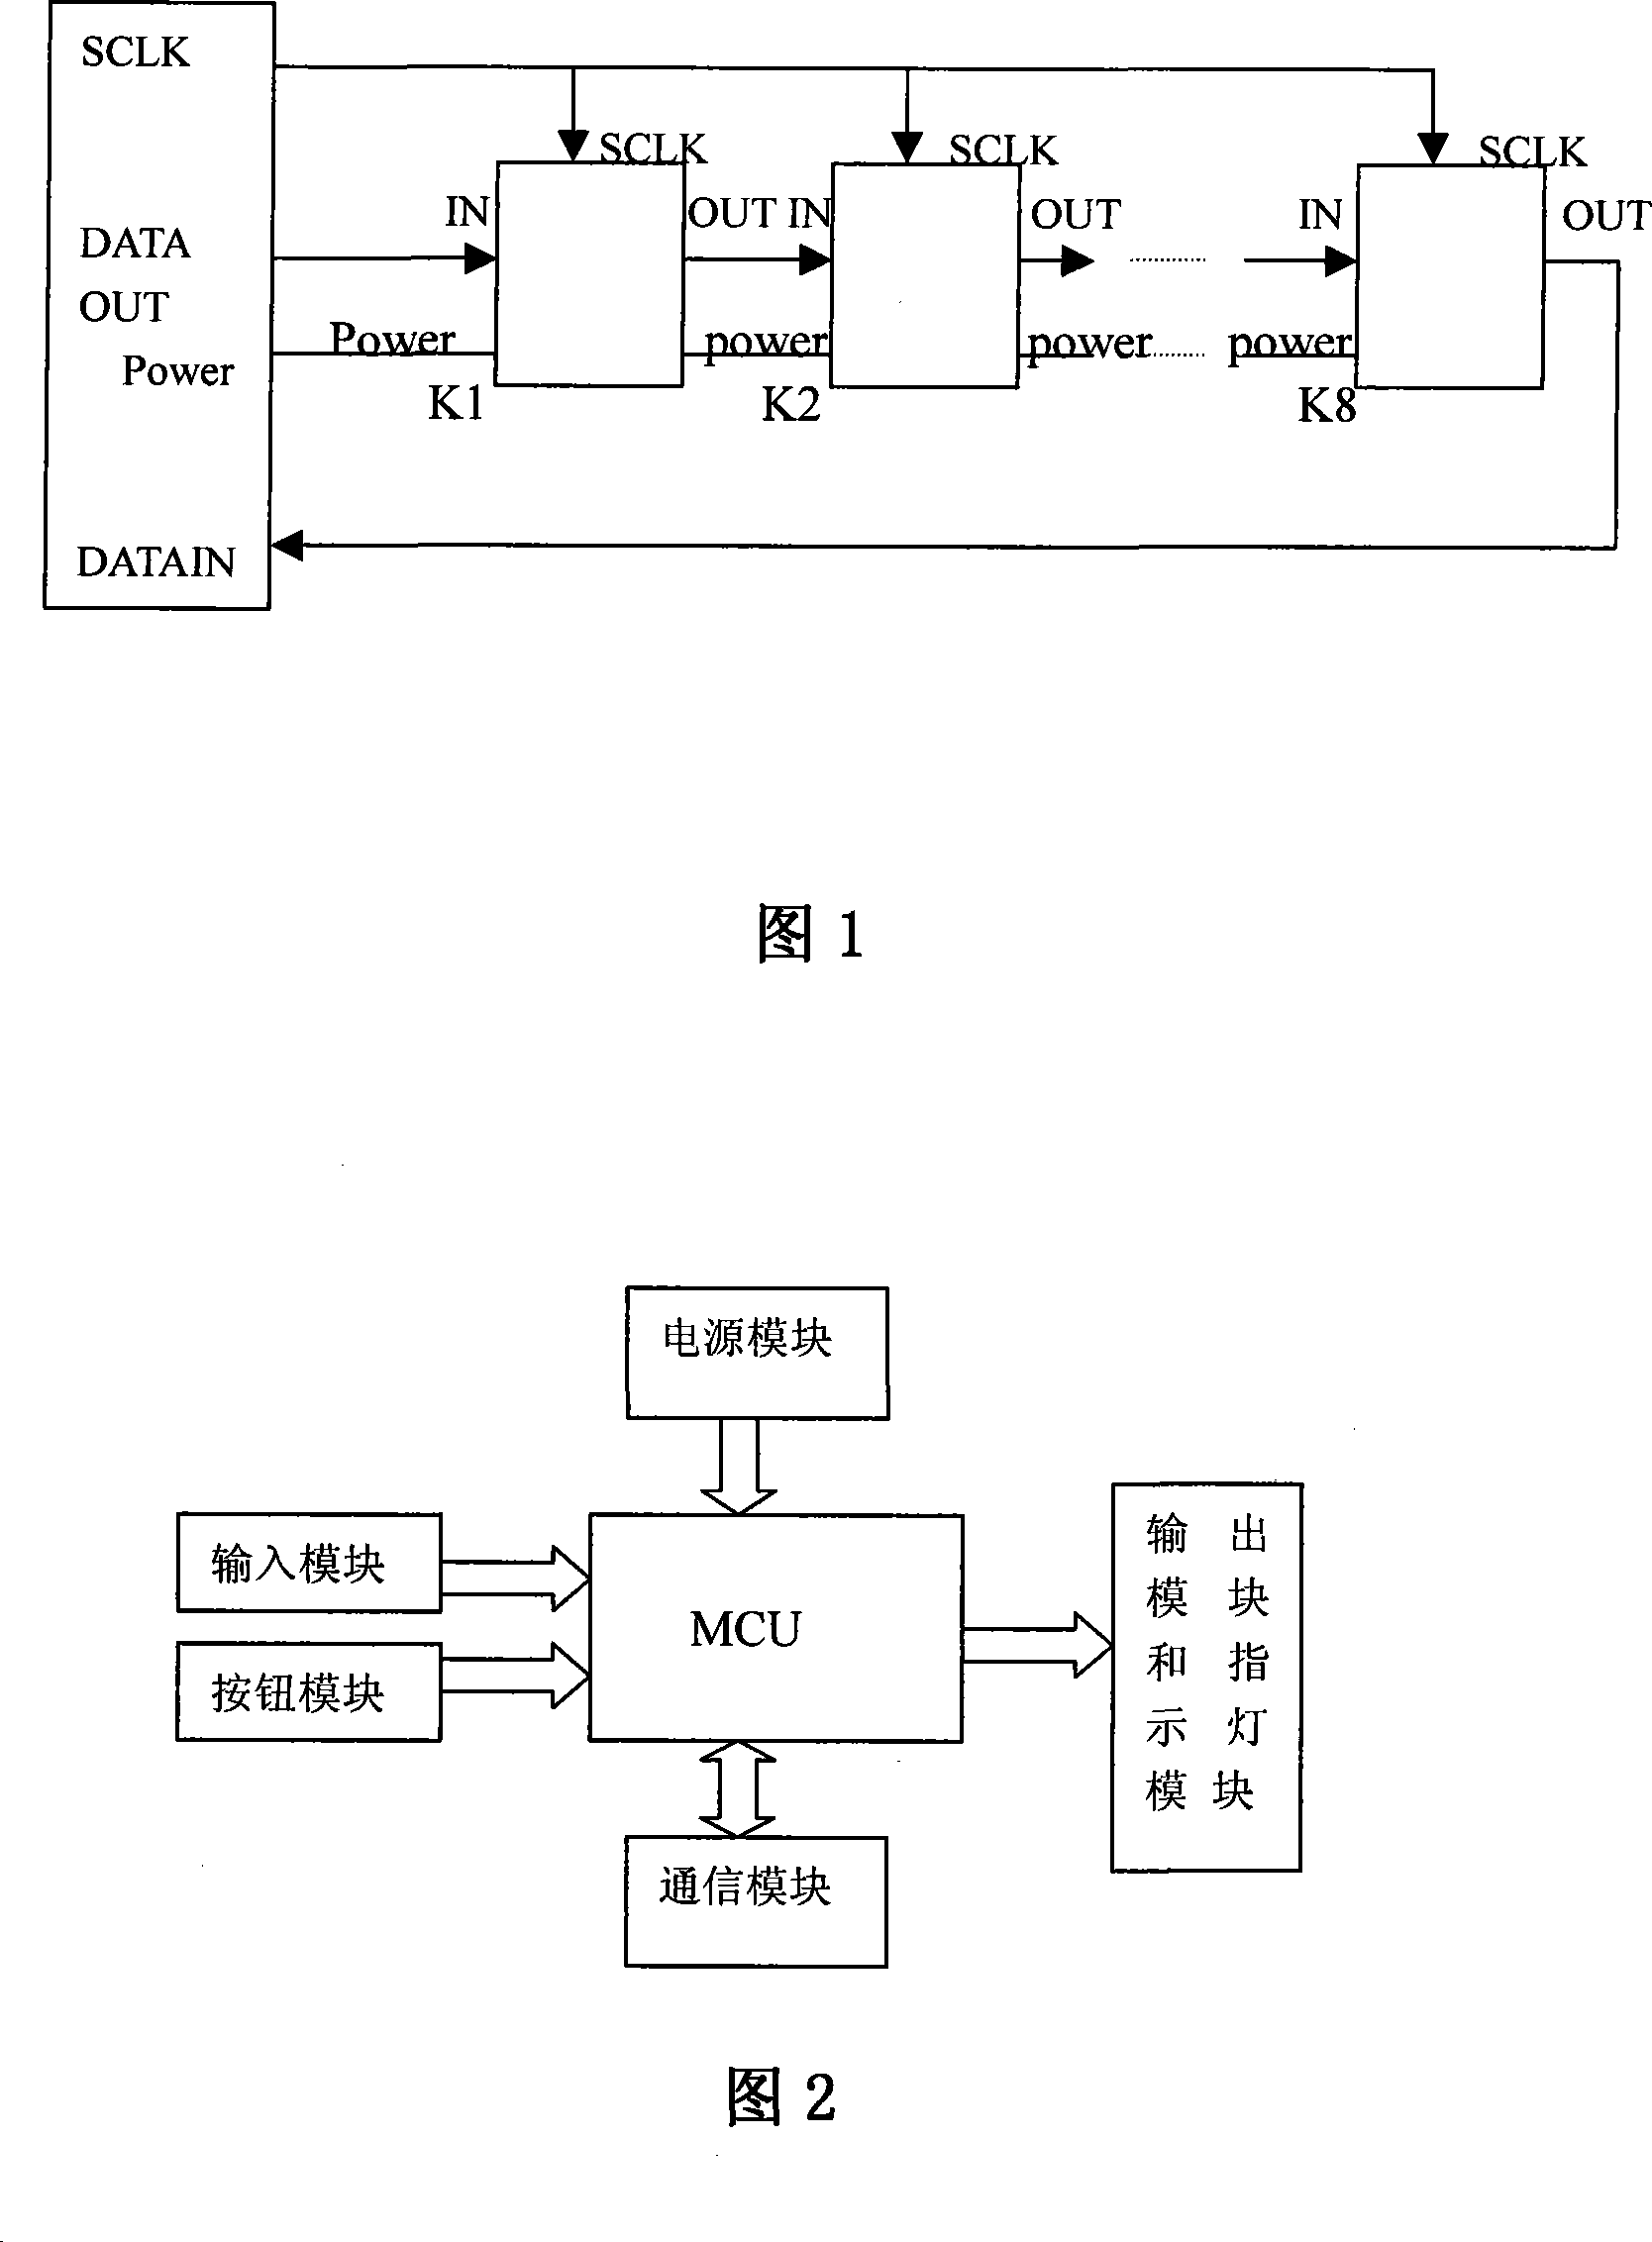 Elevator serial push-button based on serial communication protocol